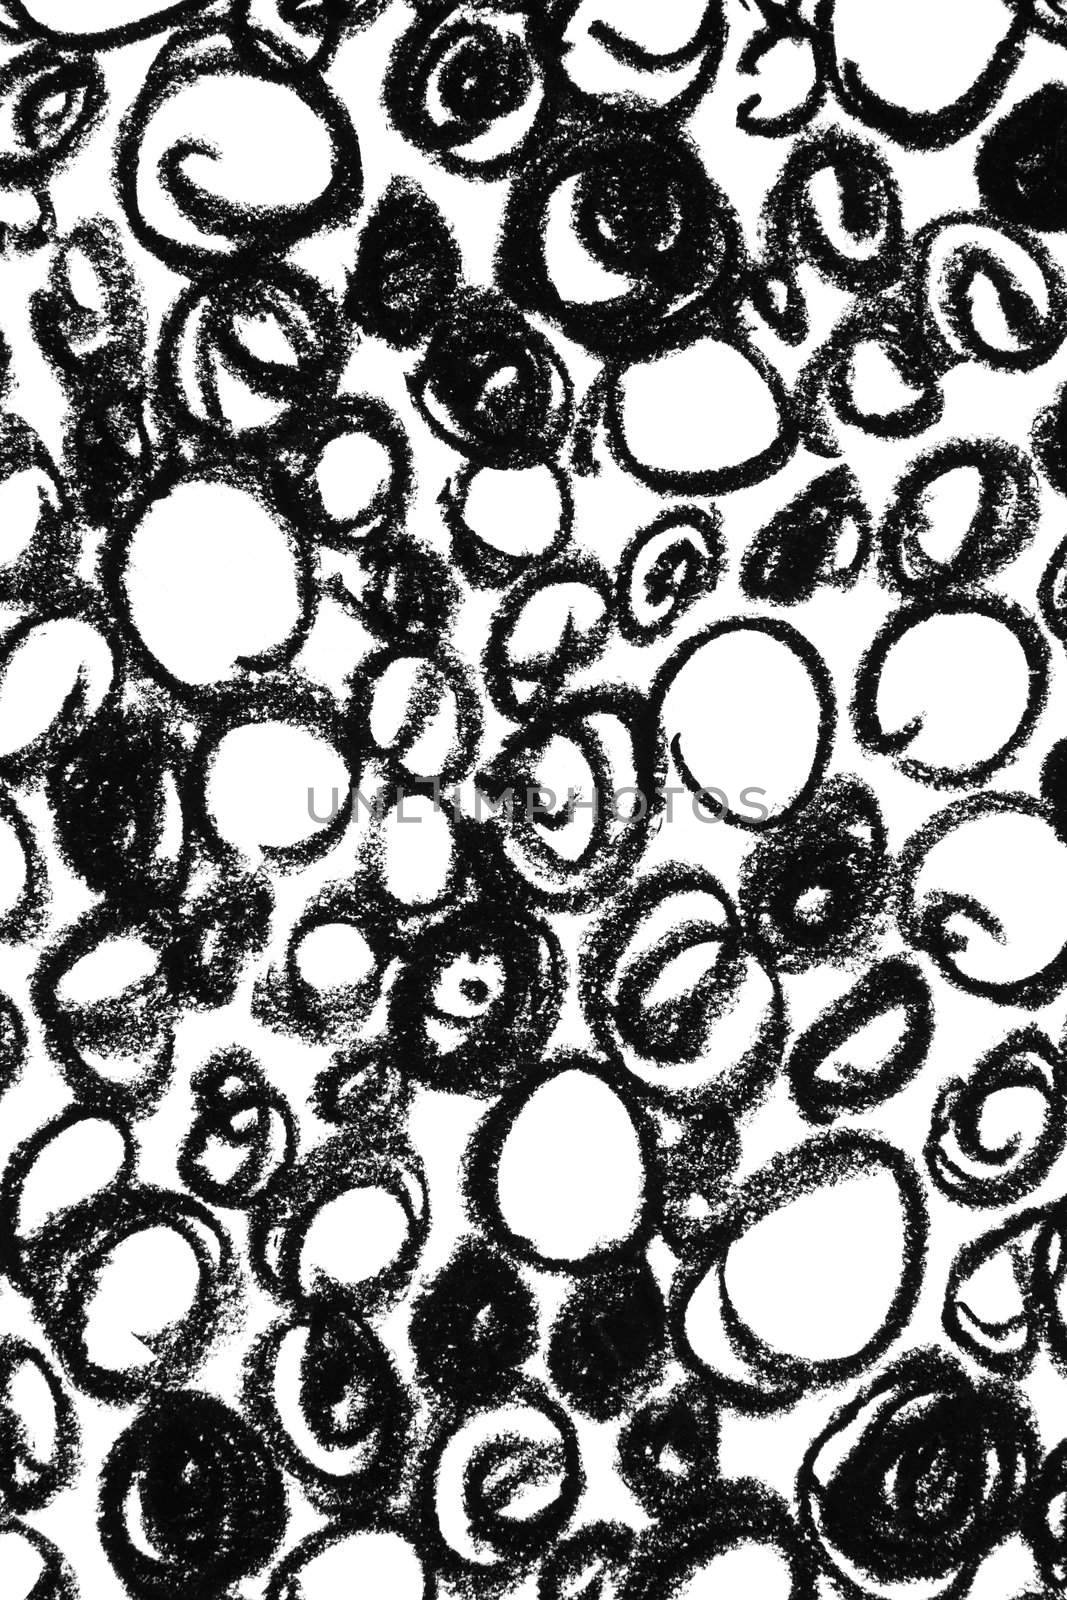 Black and white bubbles background. Drawn by hand with charcoal.